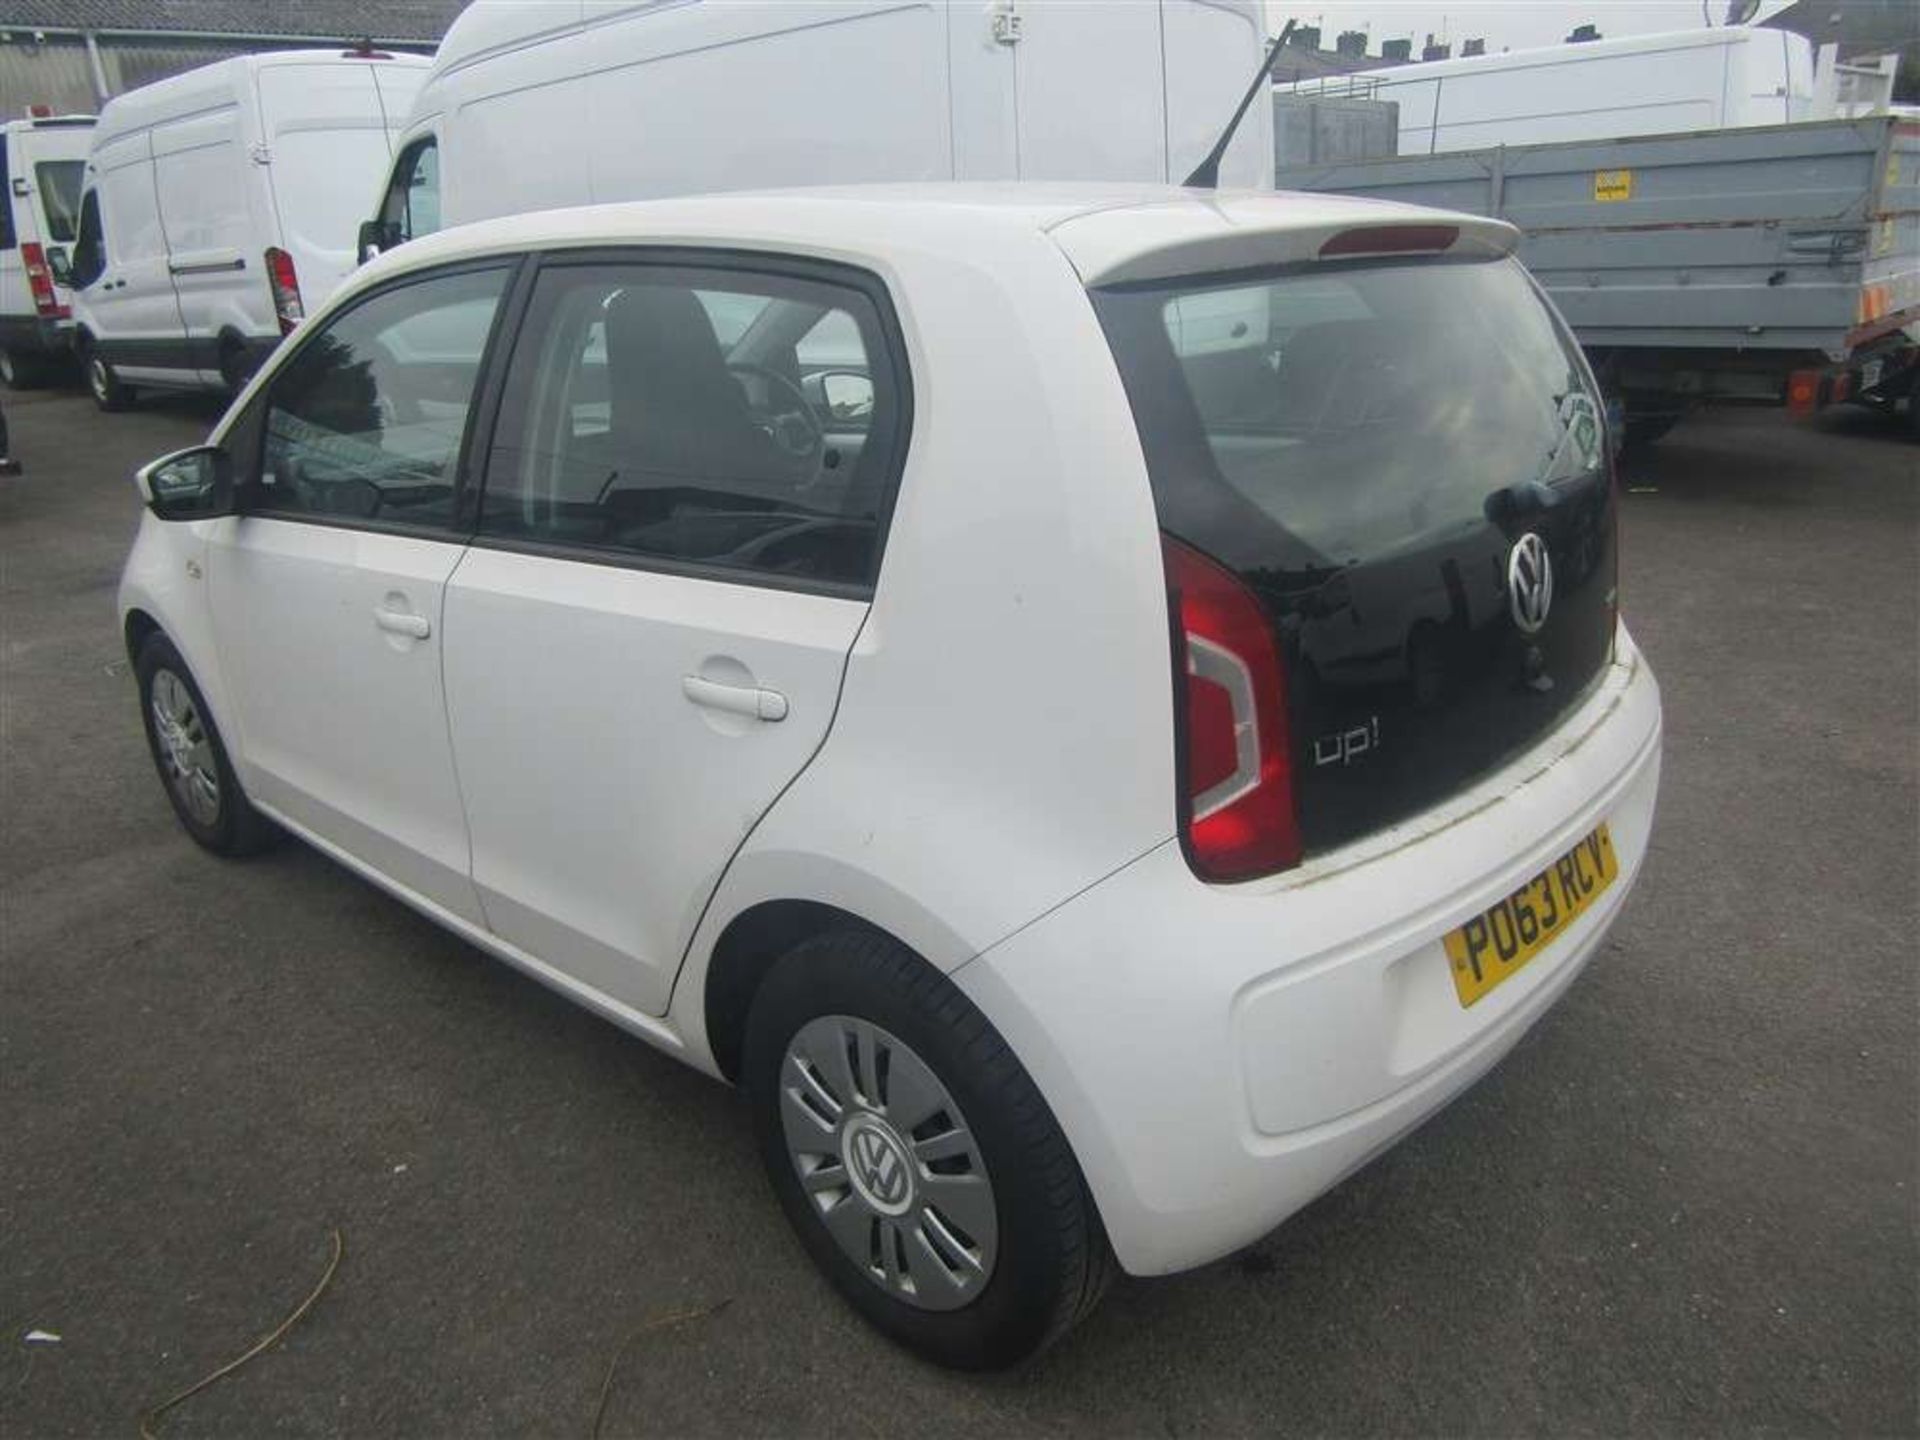 2013 63 reg VW Move UP Bluemotion Technology (Direct Fire & Rescue Service) - Image 3 of 6